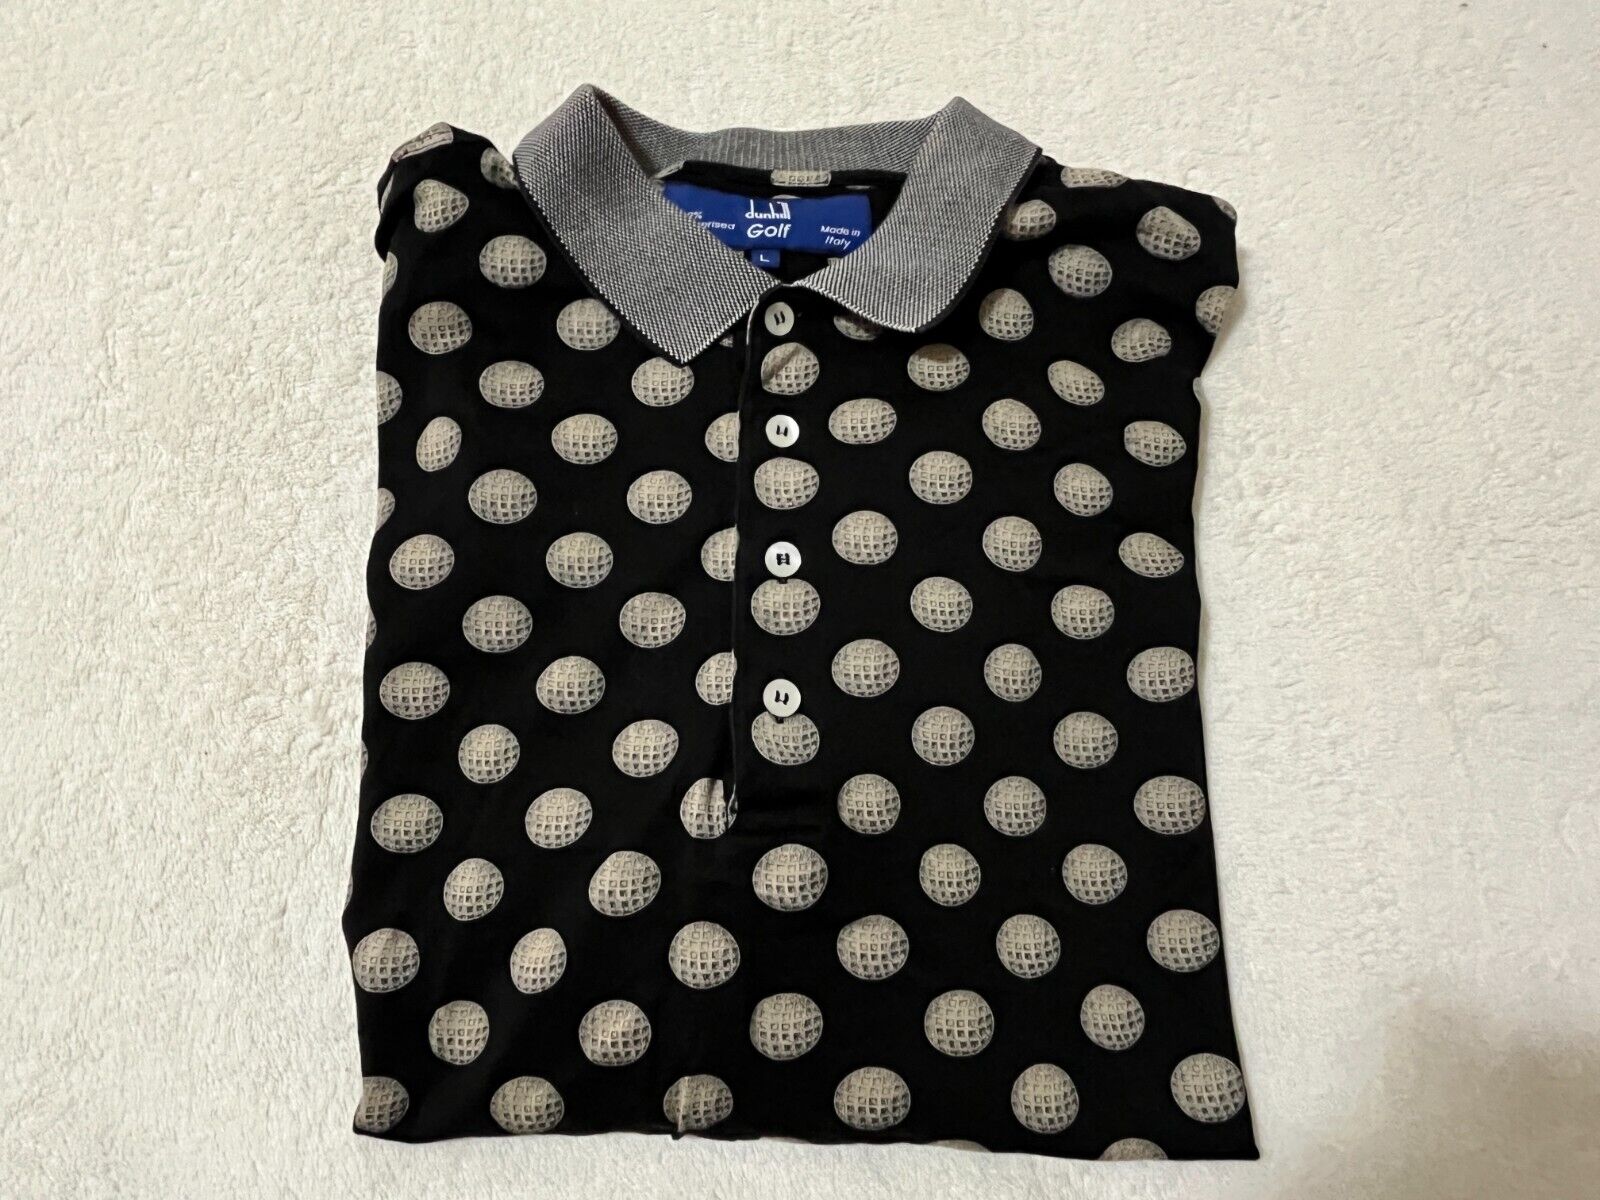 Judd\'s Very Nice Dunhill 100% Mercerized Cotton Golf Shirt Size L Made in Italy